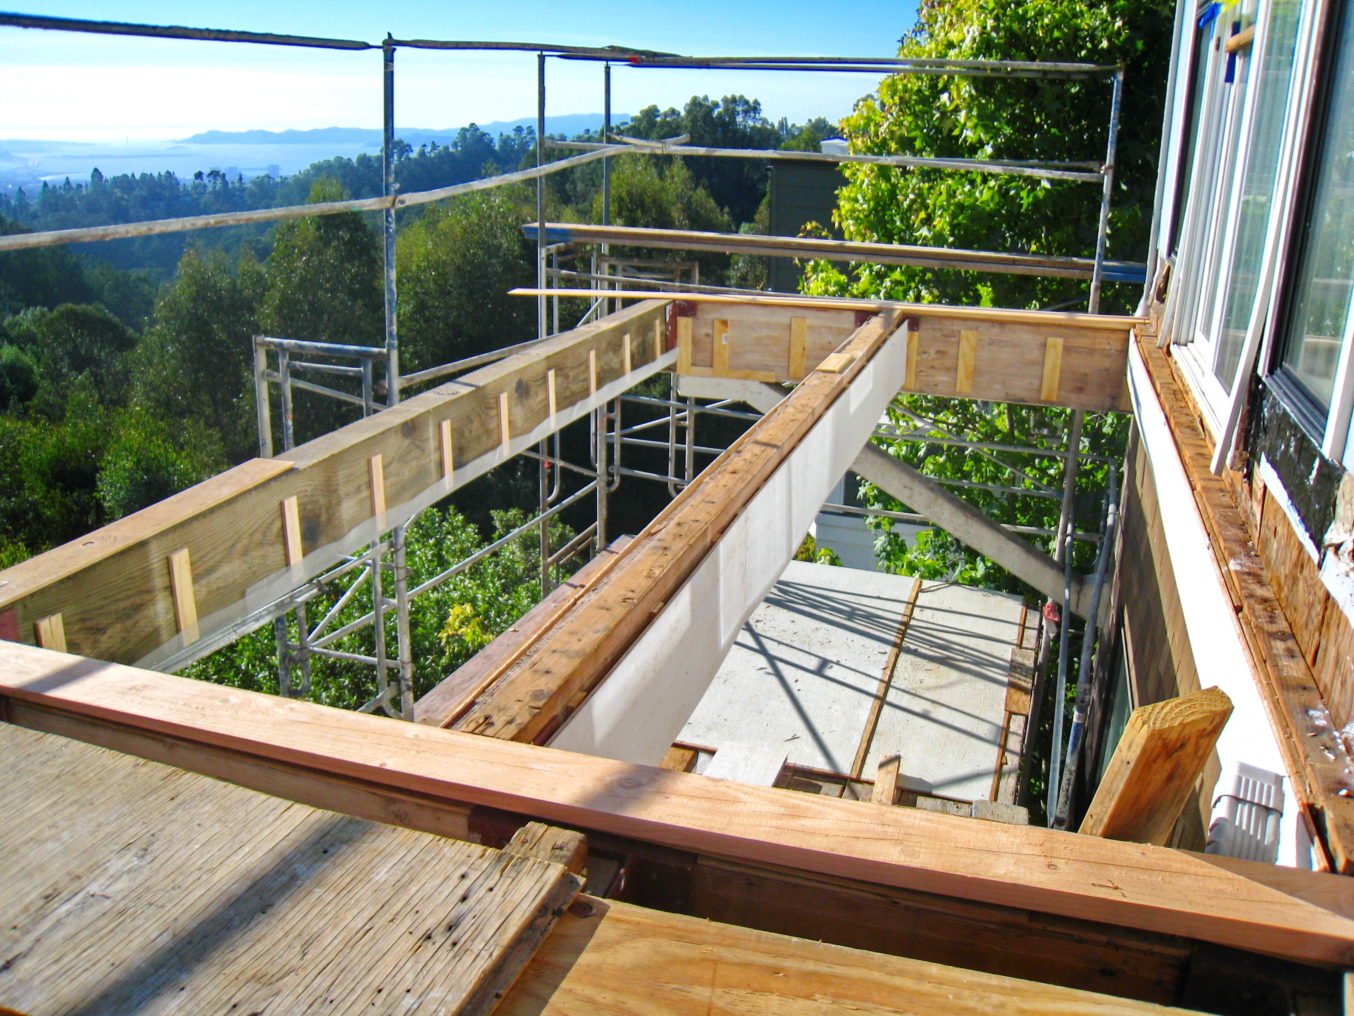 Is Your Deck Truly Low-Maintenance or Maintenance-Free? There’s No Such Thing!